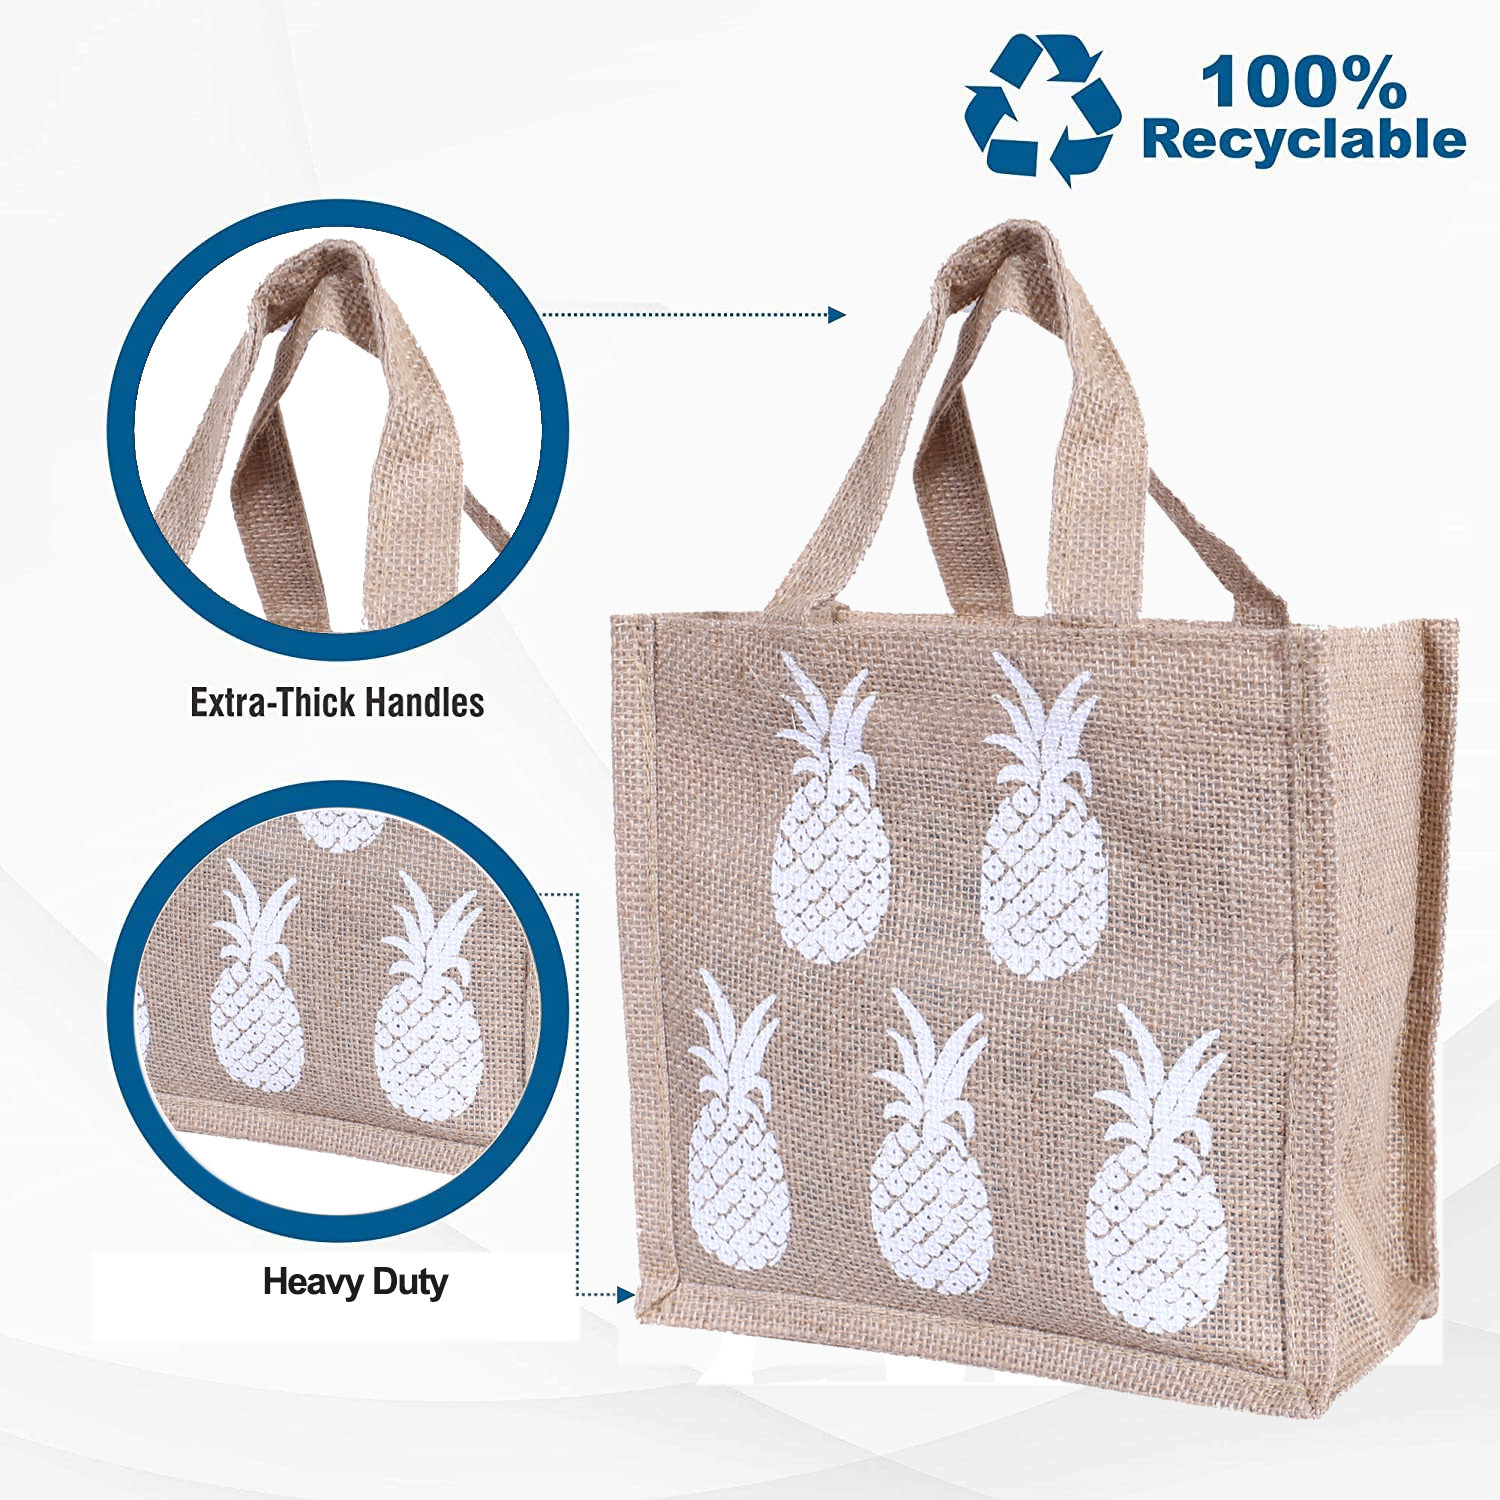 Kuber Industries Lunch Bag|Reusable Jute Fabric Tote Bag|Durable & Attractive Print Tiffin Carry Hand bag with Handle For office,School,Gift,Pack of 2 (Gray & Brown)